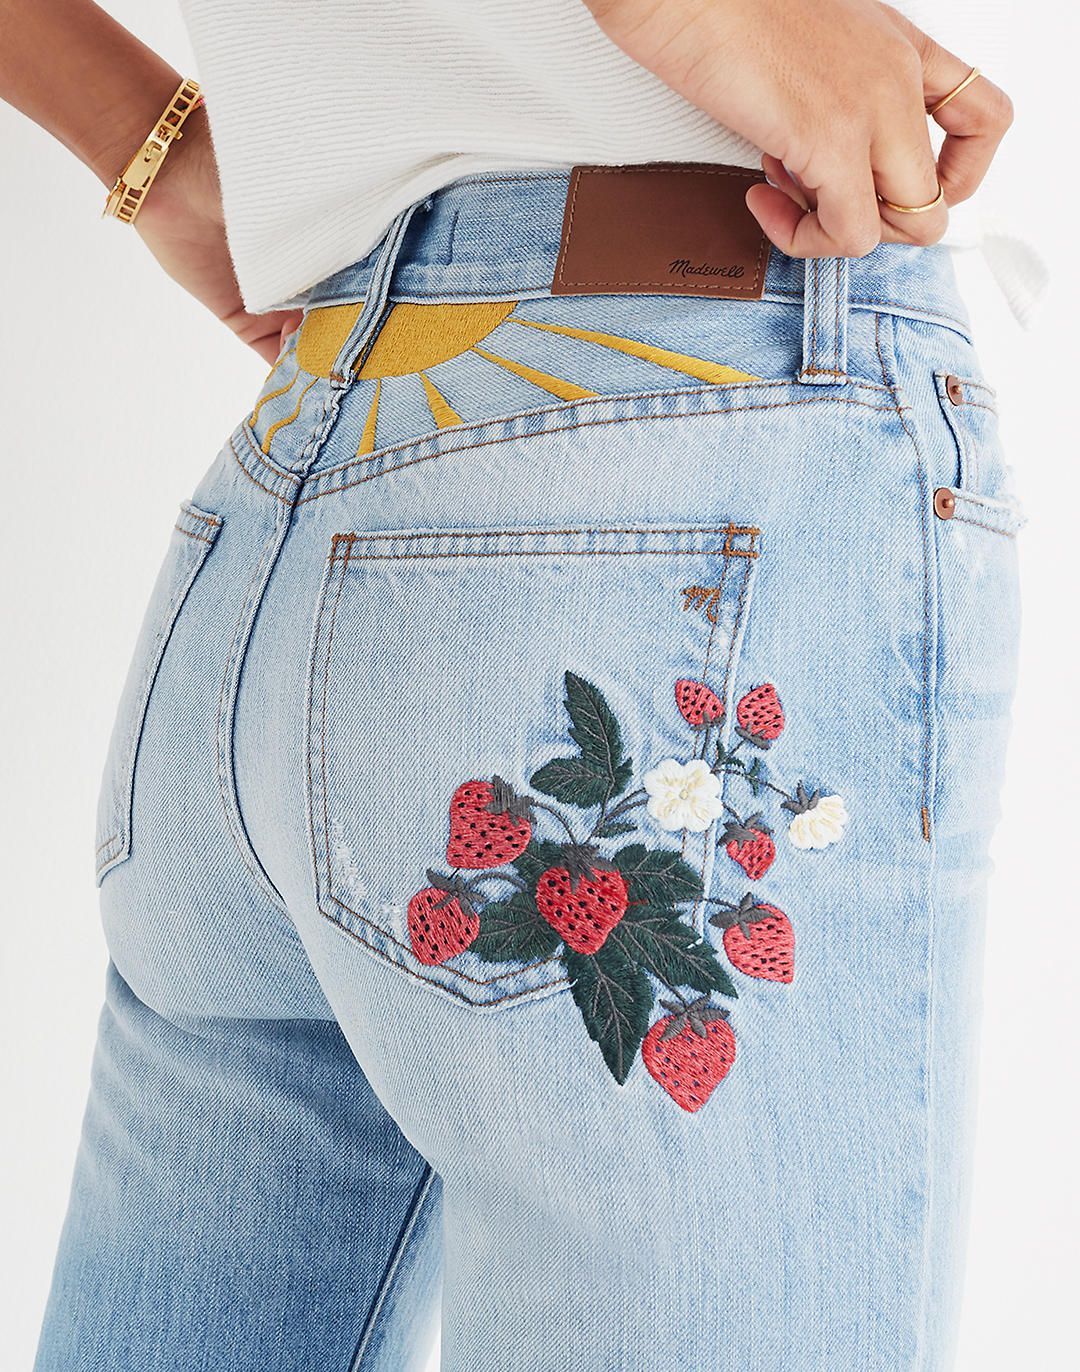 The Petite Perfect Summer Jean: Strawberry Embroidered Edition -   16 DIY Clothes Crafts fashion ideas